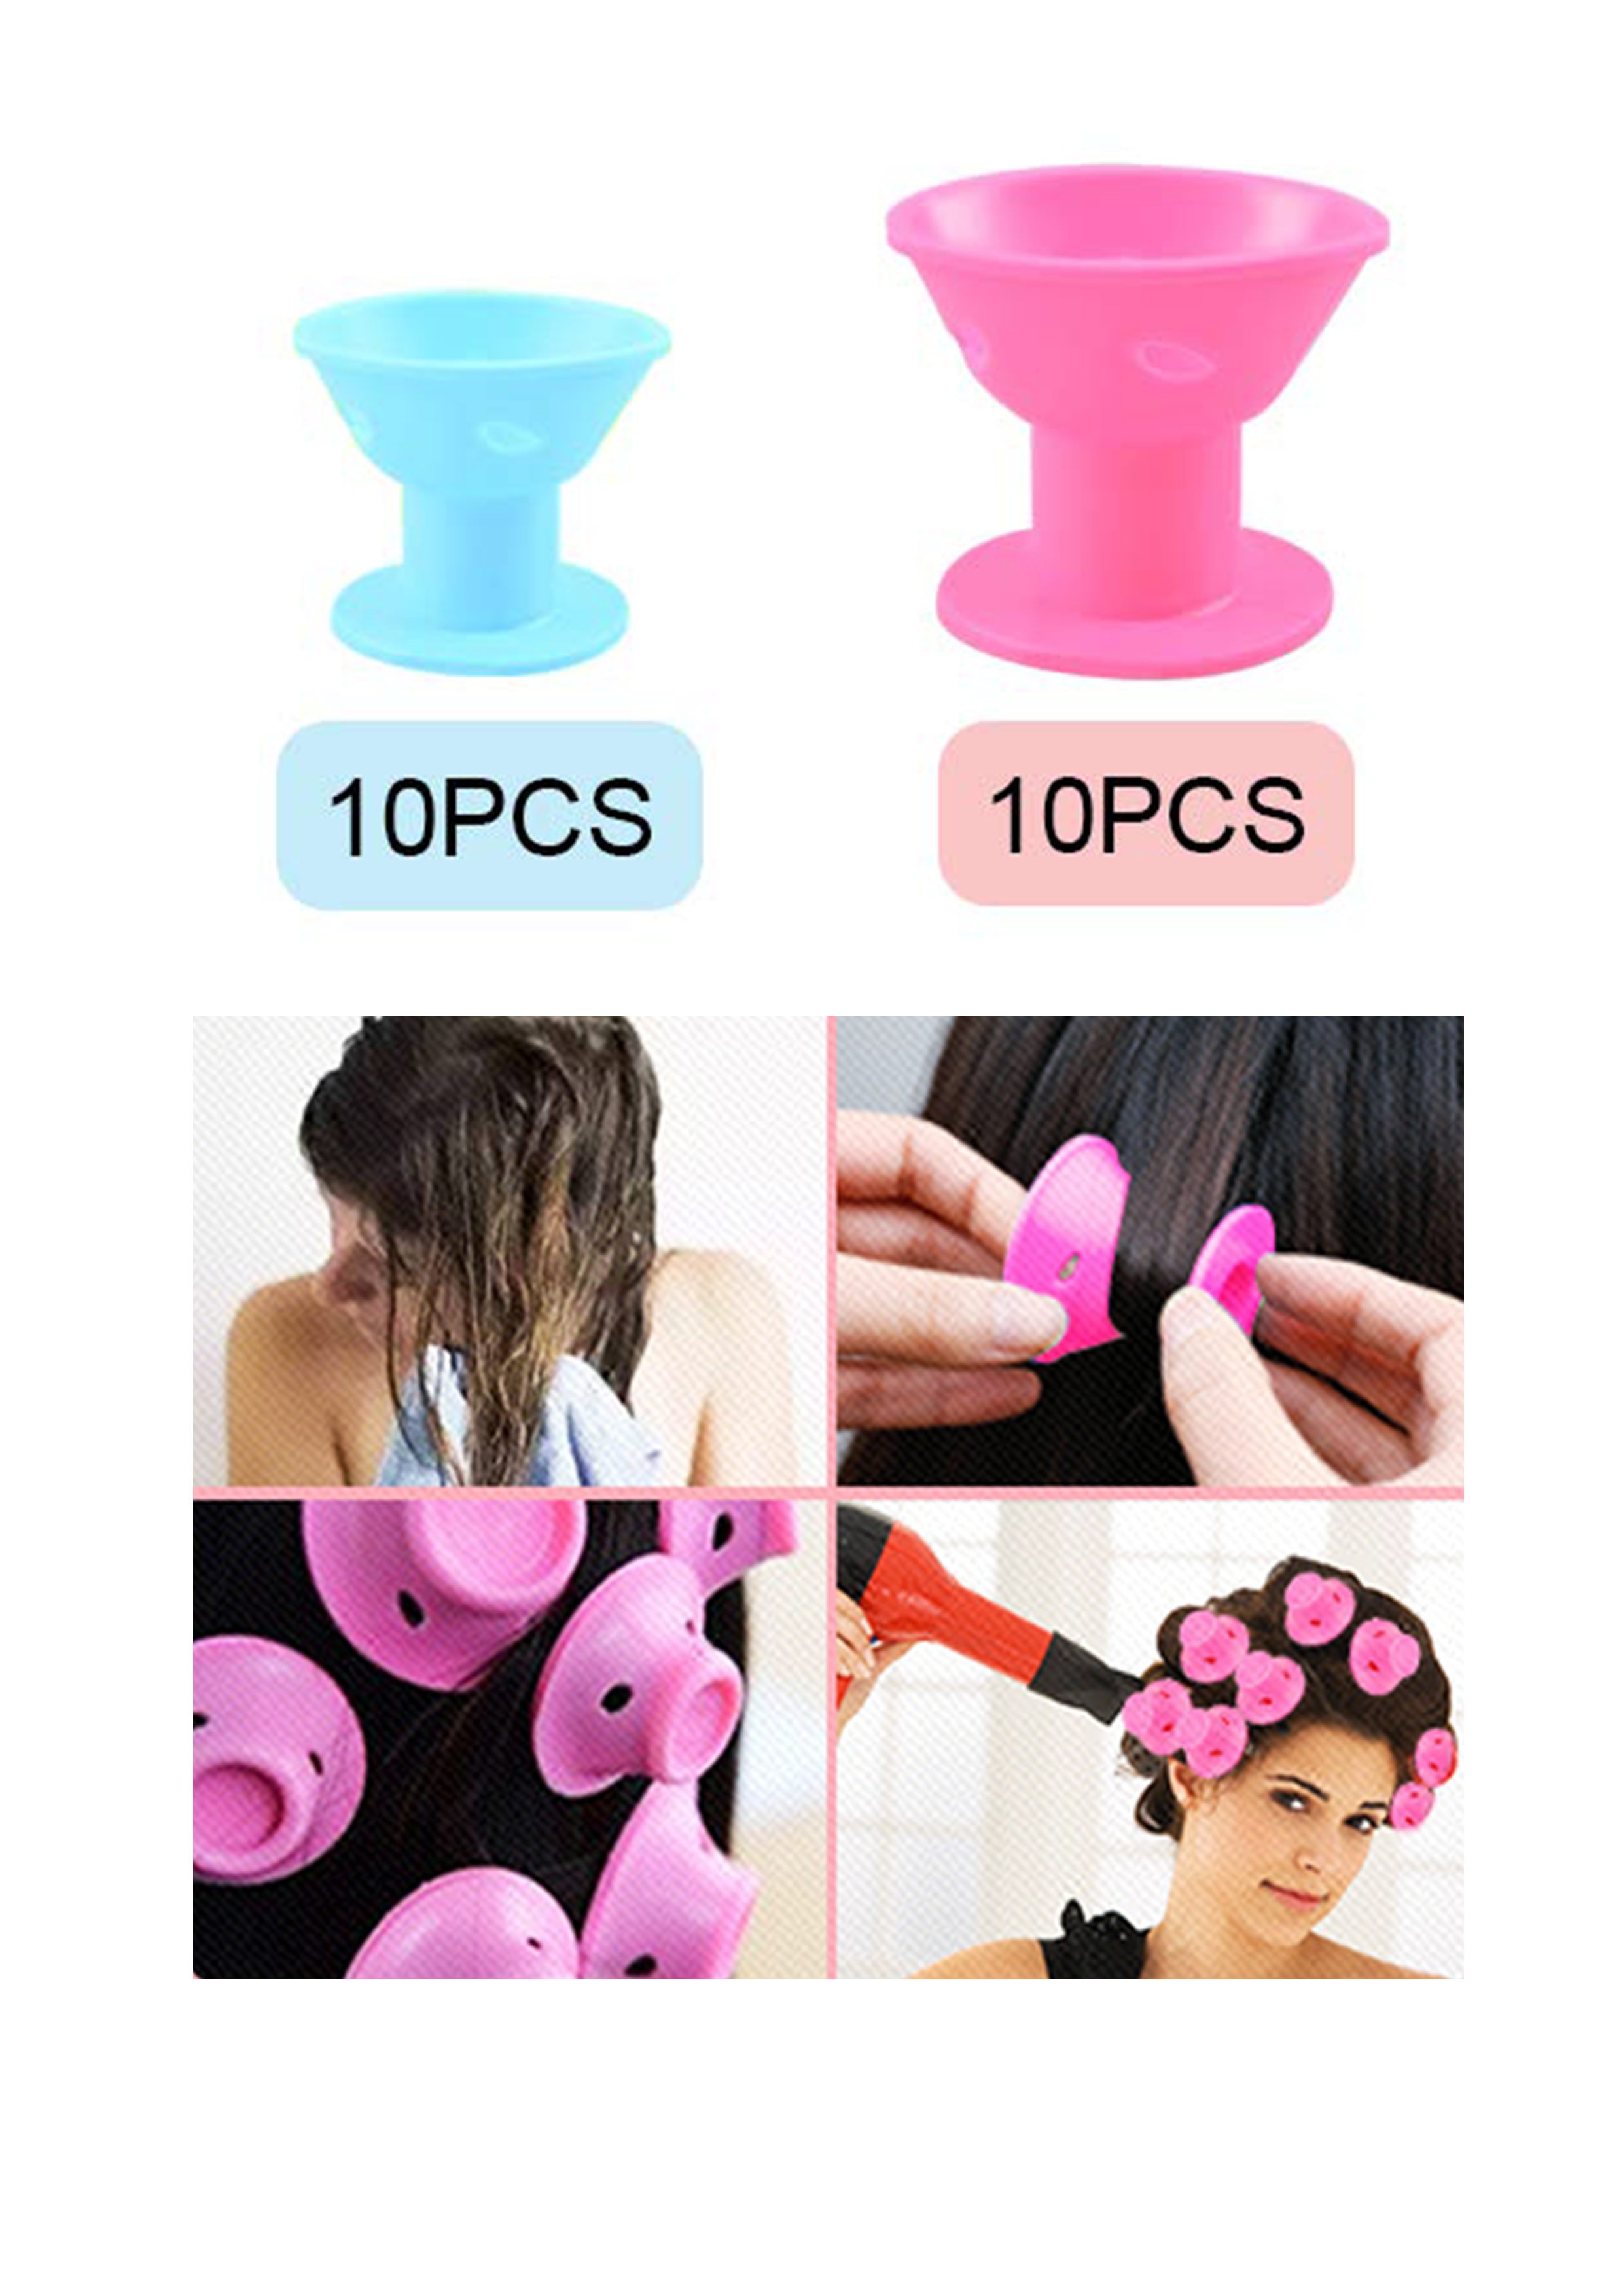 MINISO TPR HAIR ROLLERS (10 LARGE & 10 SMALL) 2012391910101 HAIR CURLER